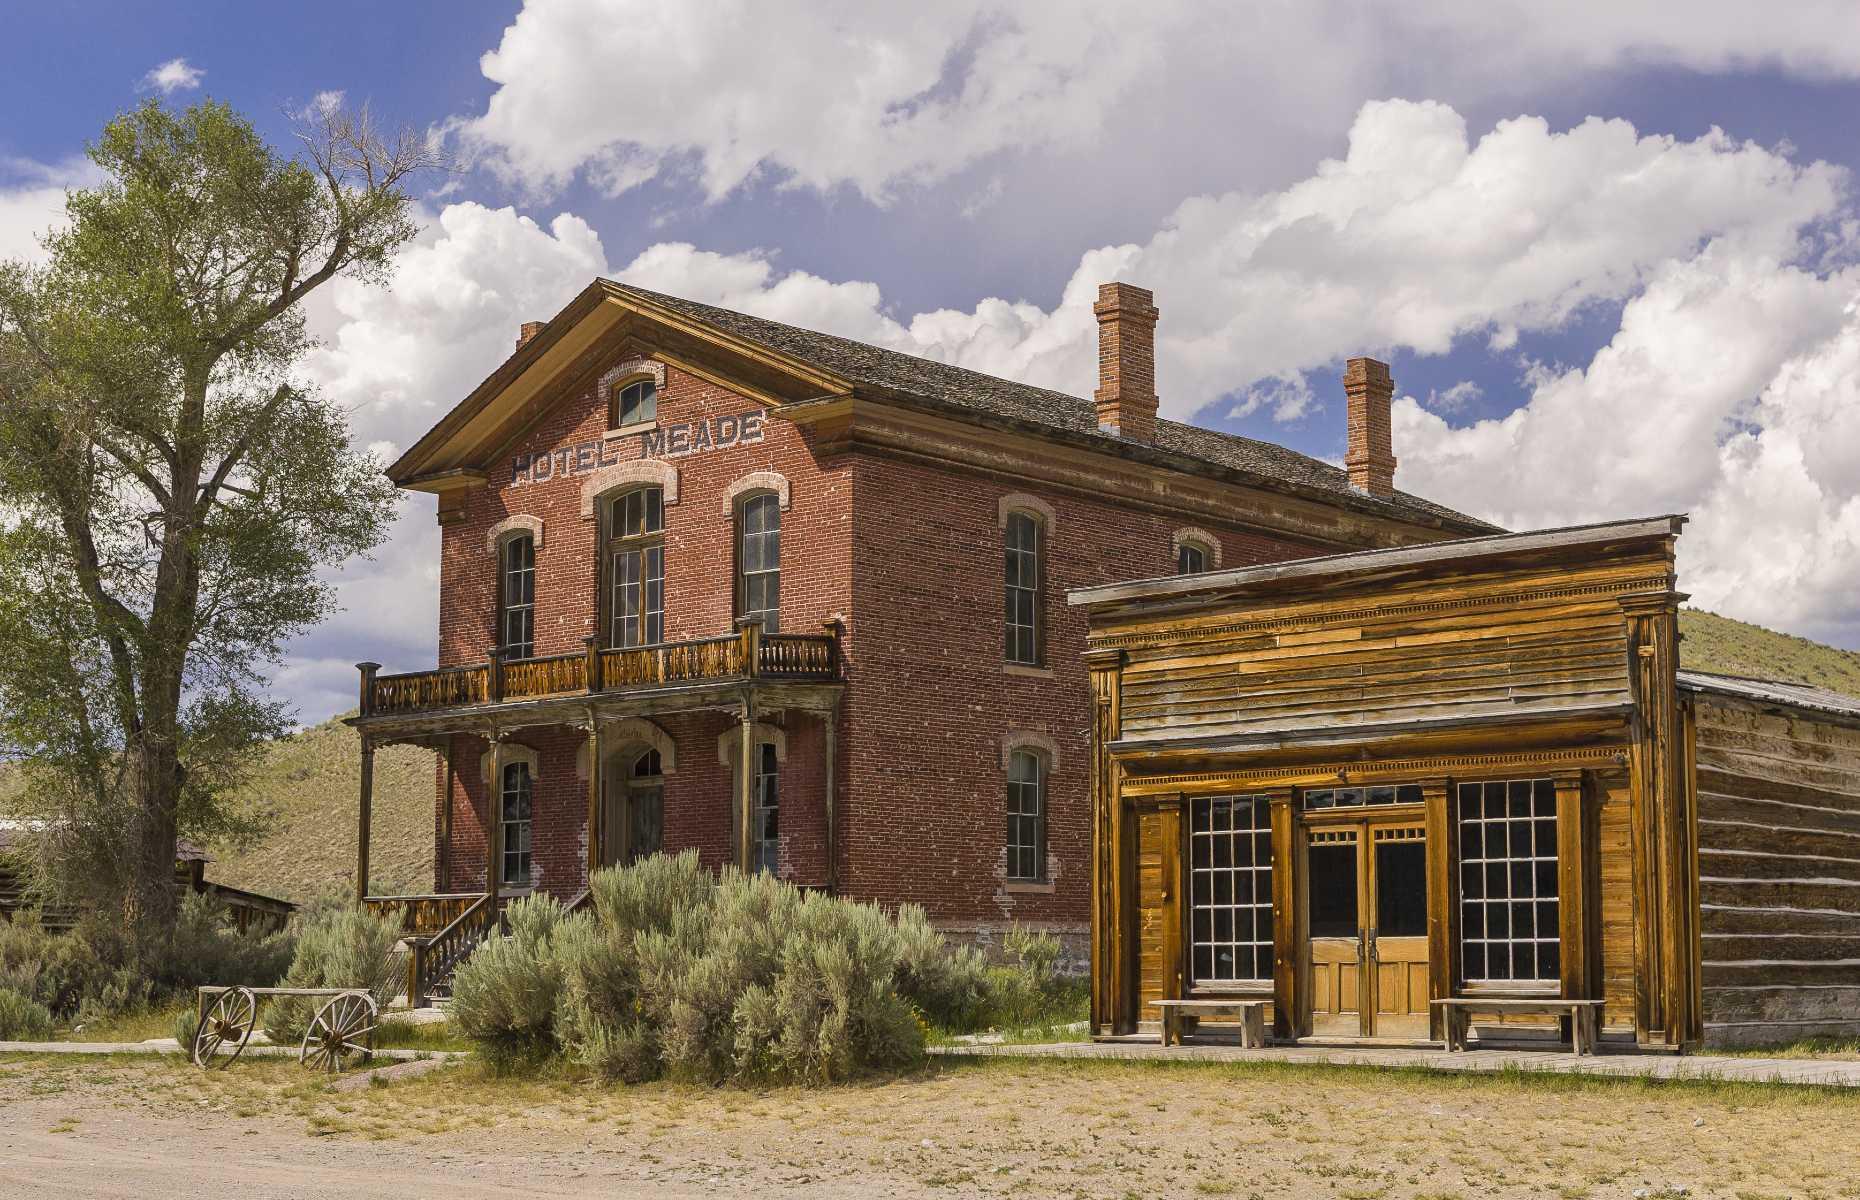 <p>Bannack, a former boomtown near the border with Idaho, was Montana’s first territorial capital and the site of its first major gold strike in 1862. Within a year, the settlement’s population had ballooned to over 3,000, which was then followed by a gradual decline as gold became less valuable.</p>  <p>Now labeled the best preserved of all the state’s ghost towns, Bannack is something of an open-air museum, showcasing more than 50 original Old West buildings seemingly frozen in time. There are 28 campsites (including a tipi to rent) open for year-round overnight stays in the park too.</p>